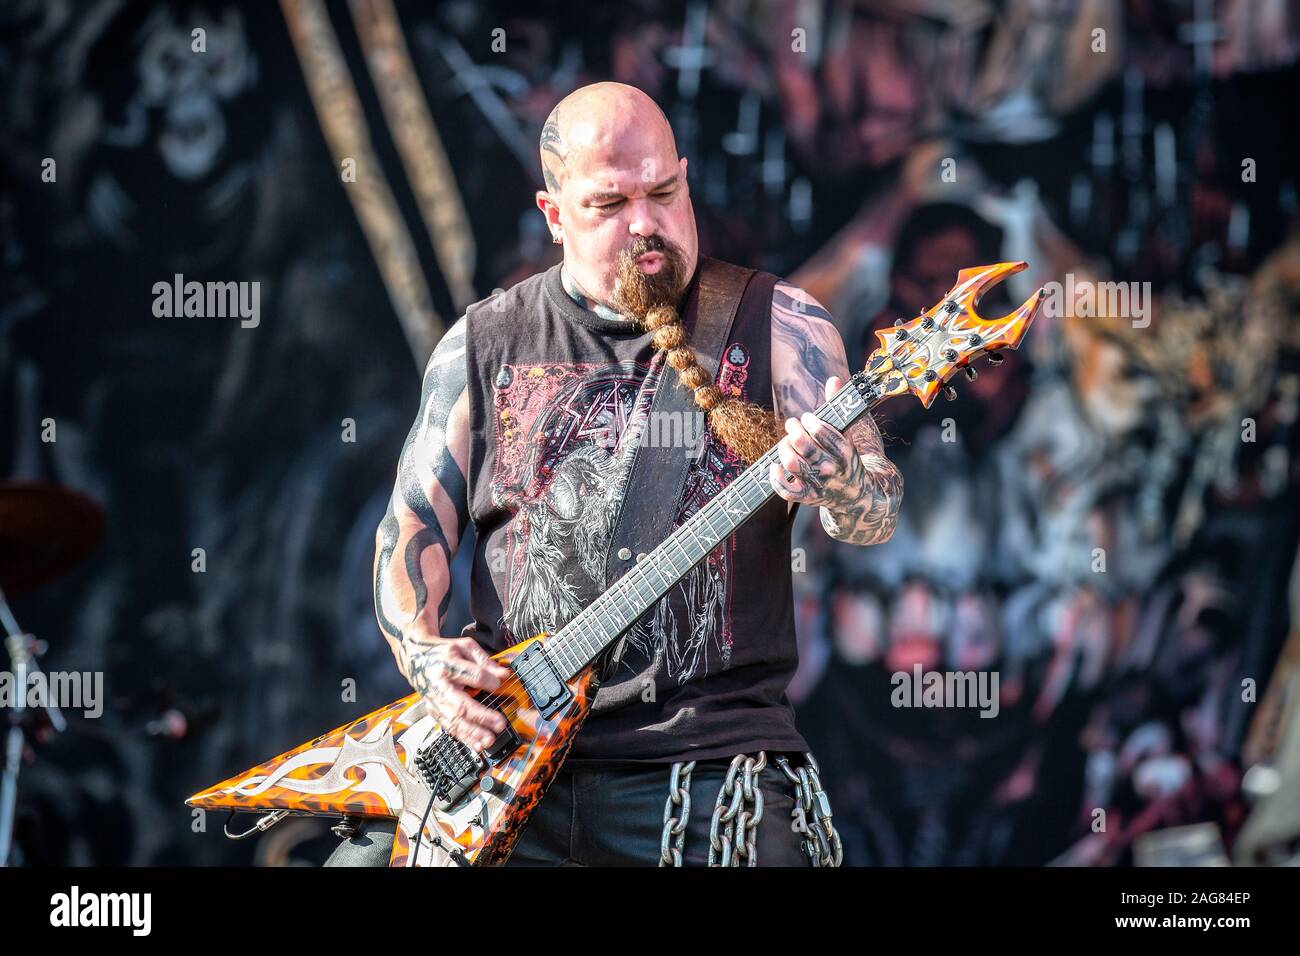 Oslo, Norway. 28th, June 2019. The American thrash metal band Slayer performs a live concert during the Norwegian music festival Tons of Rock 2019. Here guitarist Kerry King is seen live on stage. (Photo credit: Gonzales Photo - Terje Dokken). Stock Photo